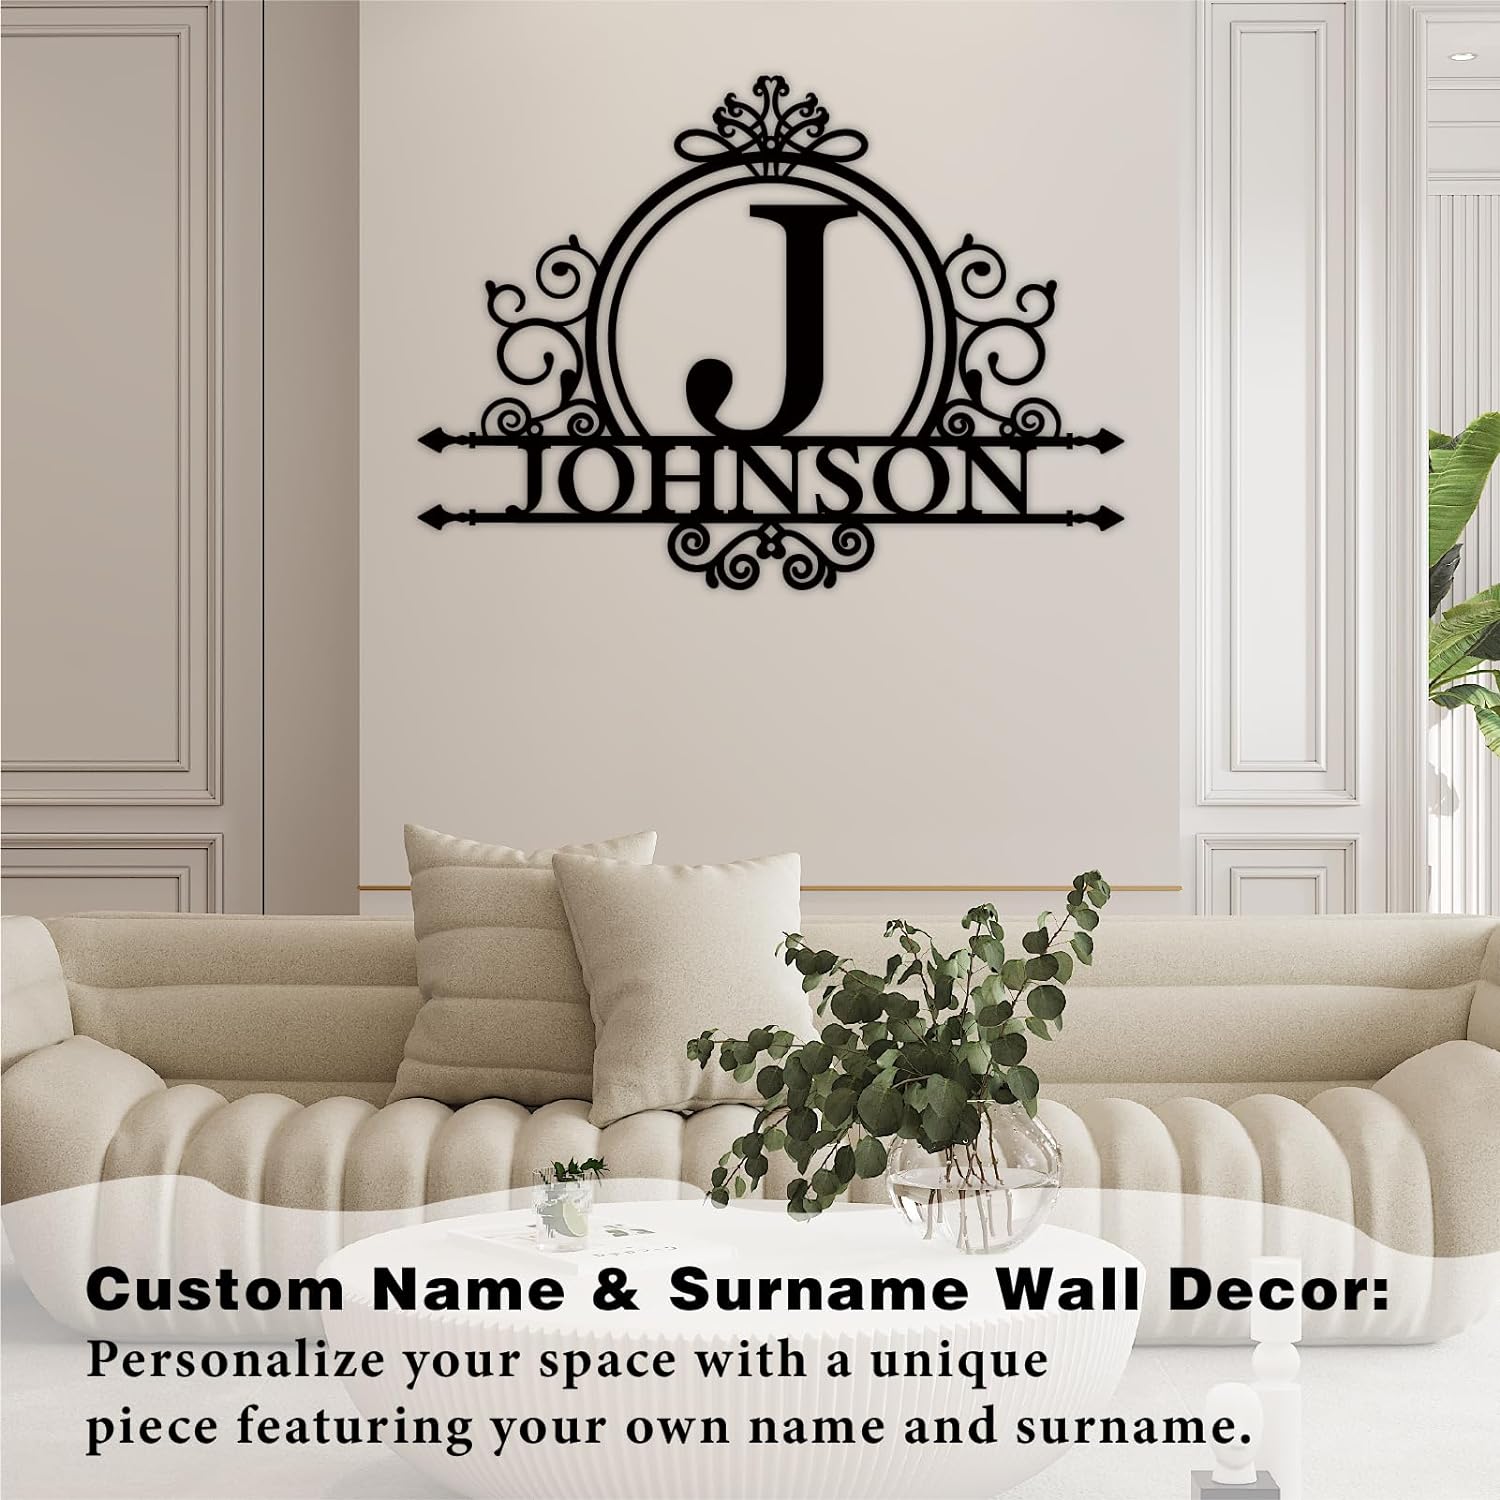 Personalized Metal Name Sign Split Letter Monogram For Home Wall Decor